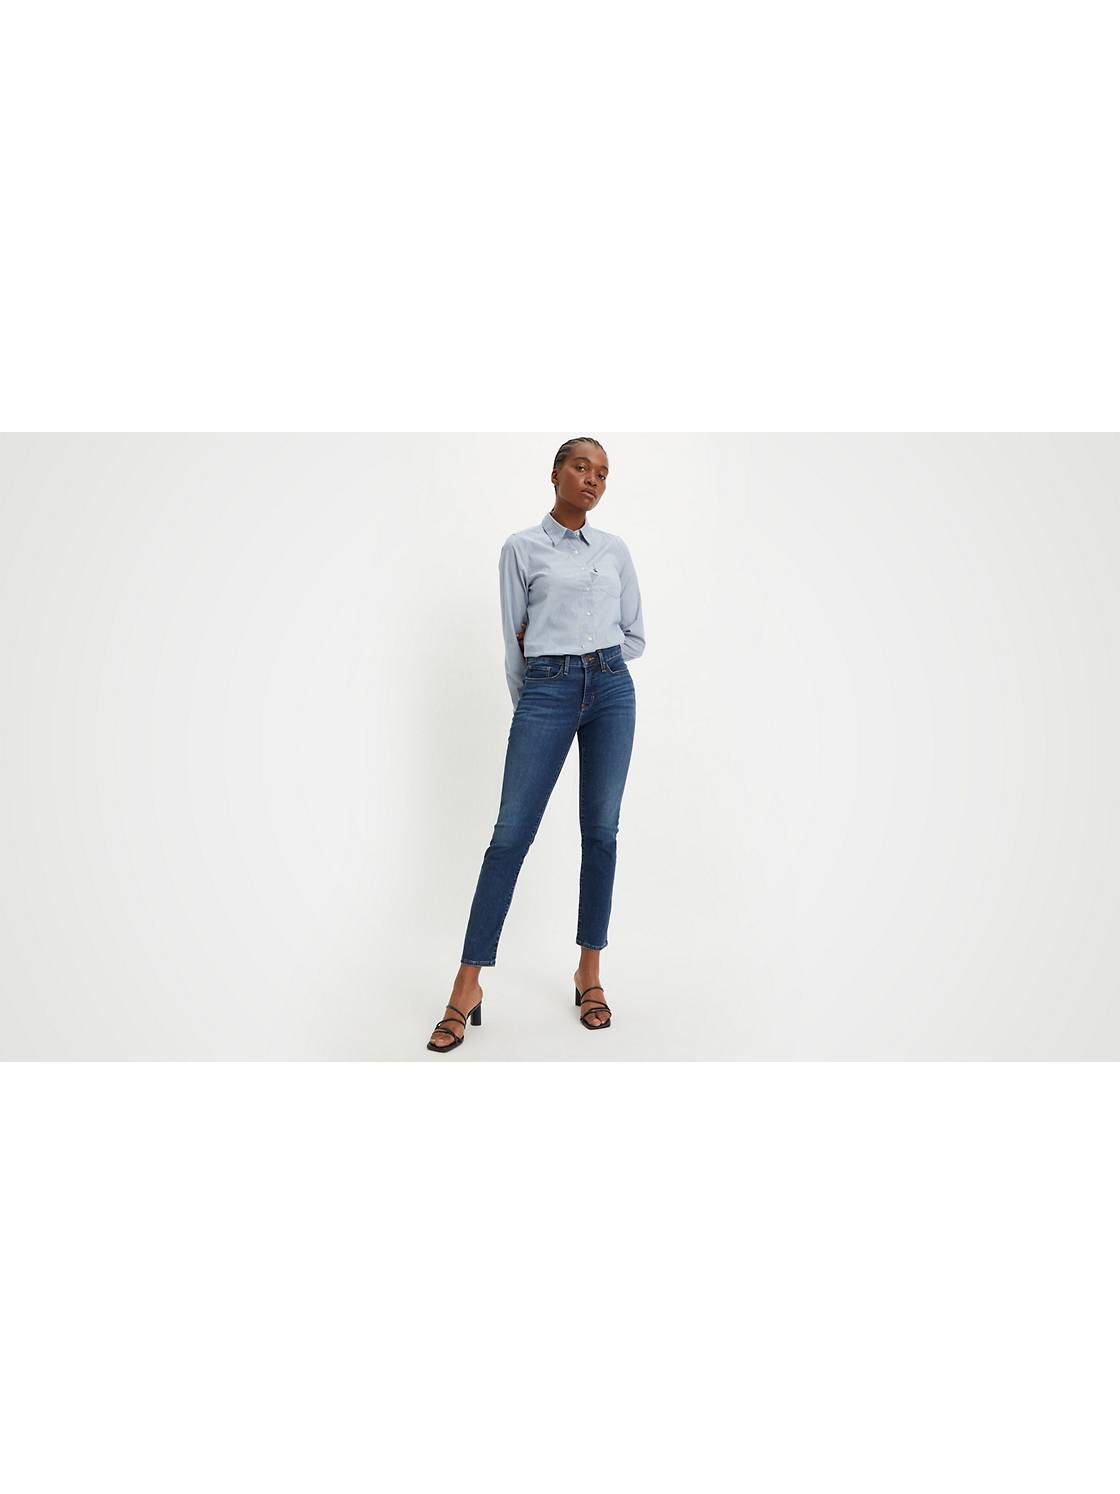 Mid-rise straight jeans - Women